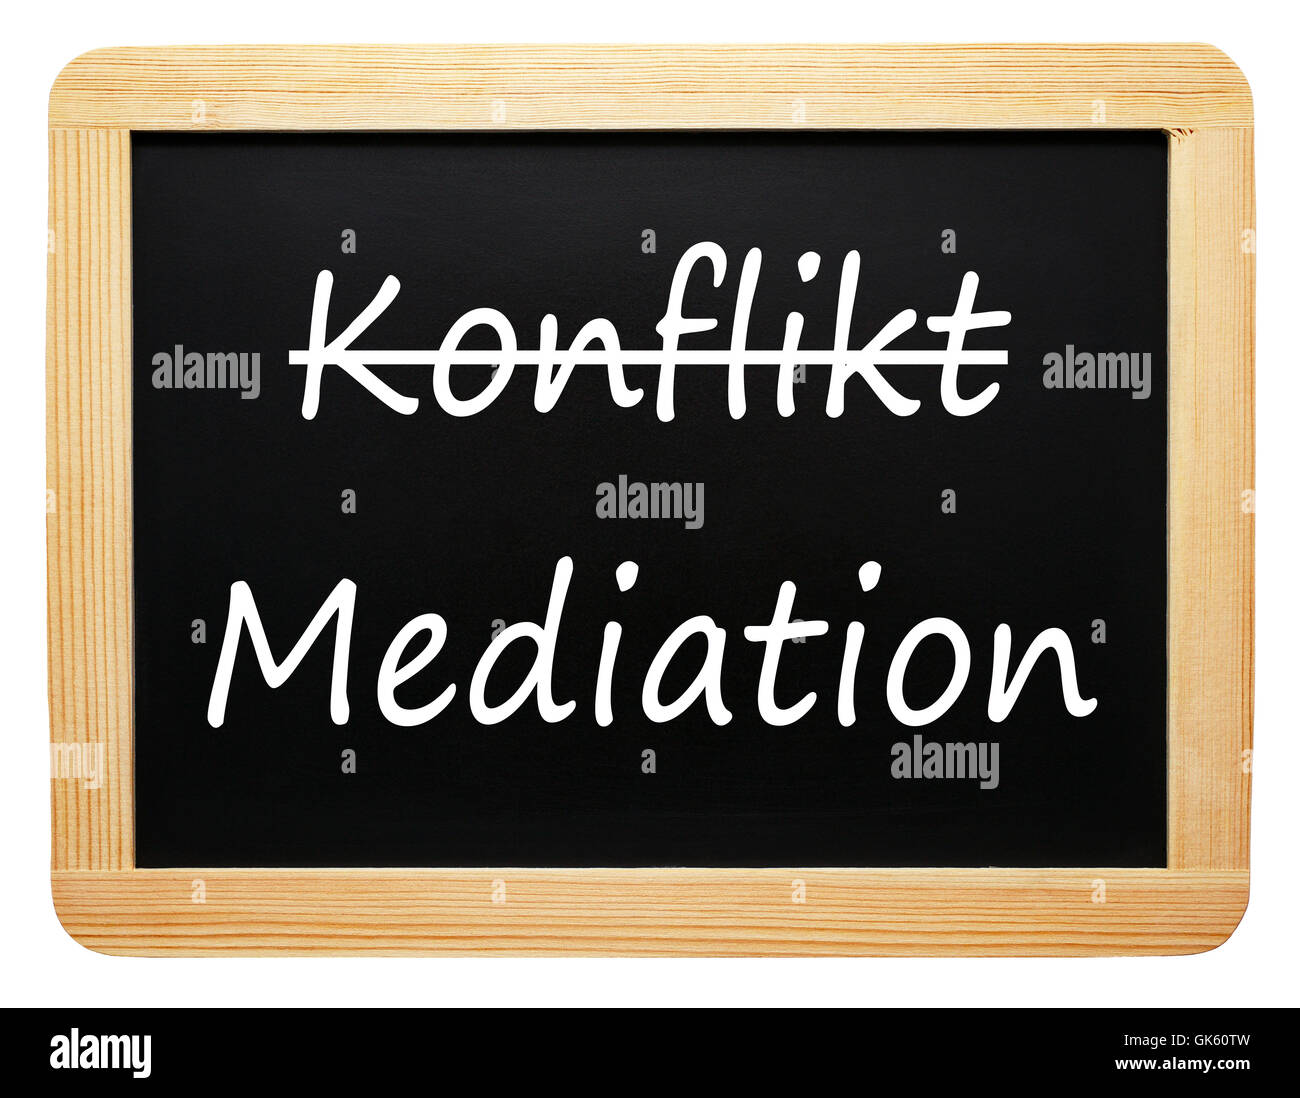 conflict and mediation Stock Photo